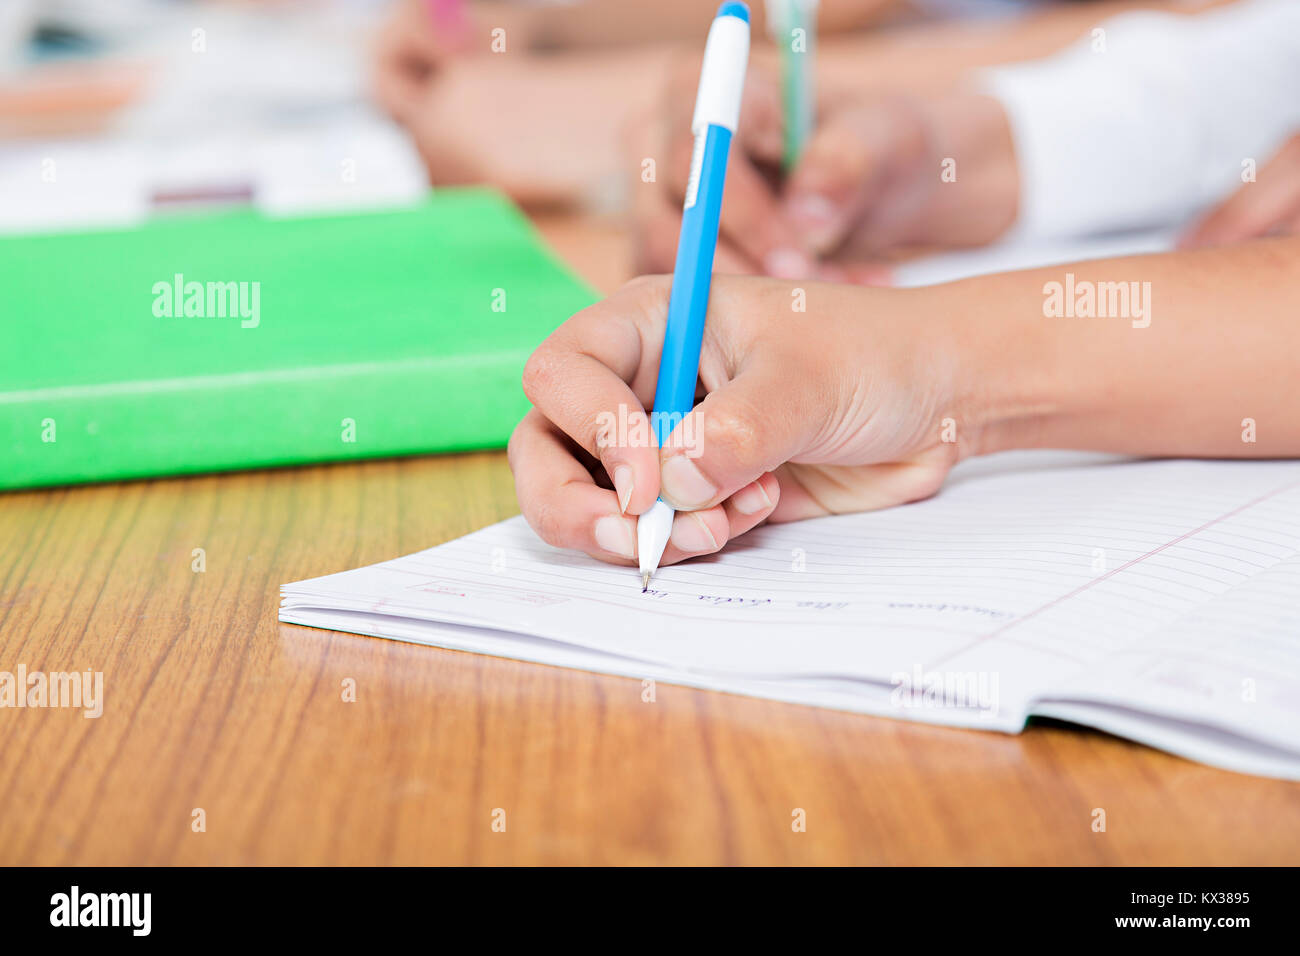 1 School Student Writing Notebook Education Learning Close-Up Stock Photo